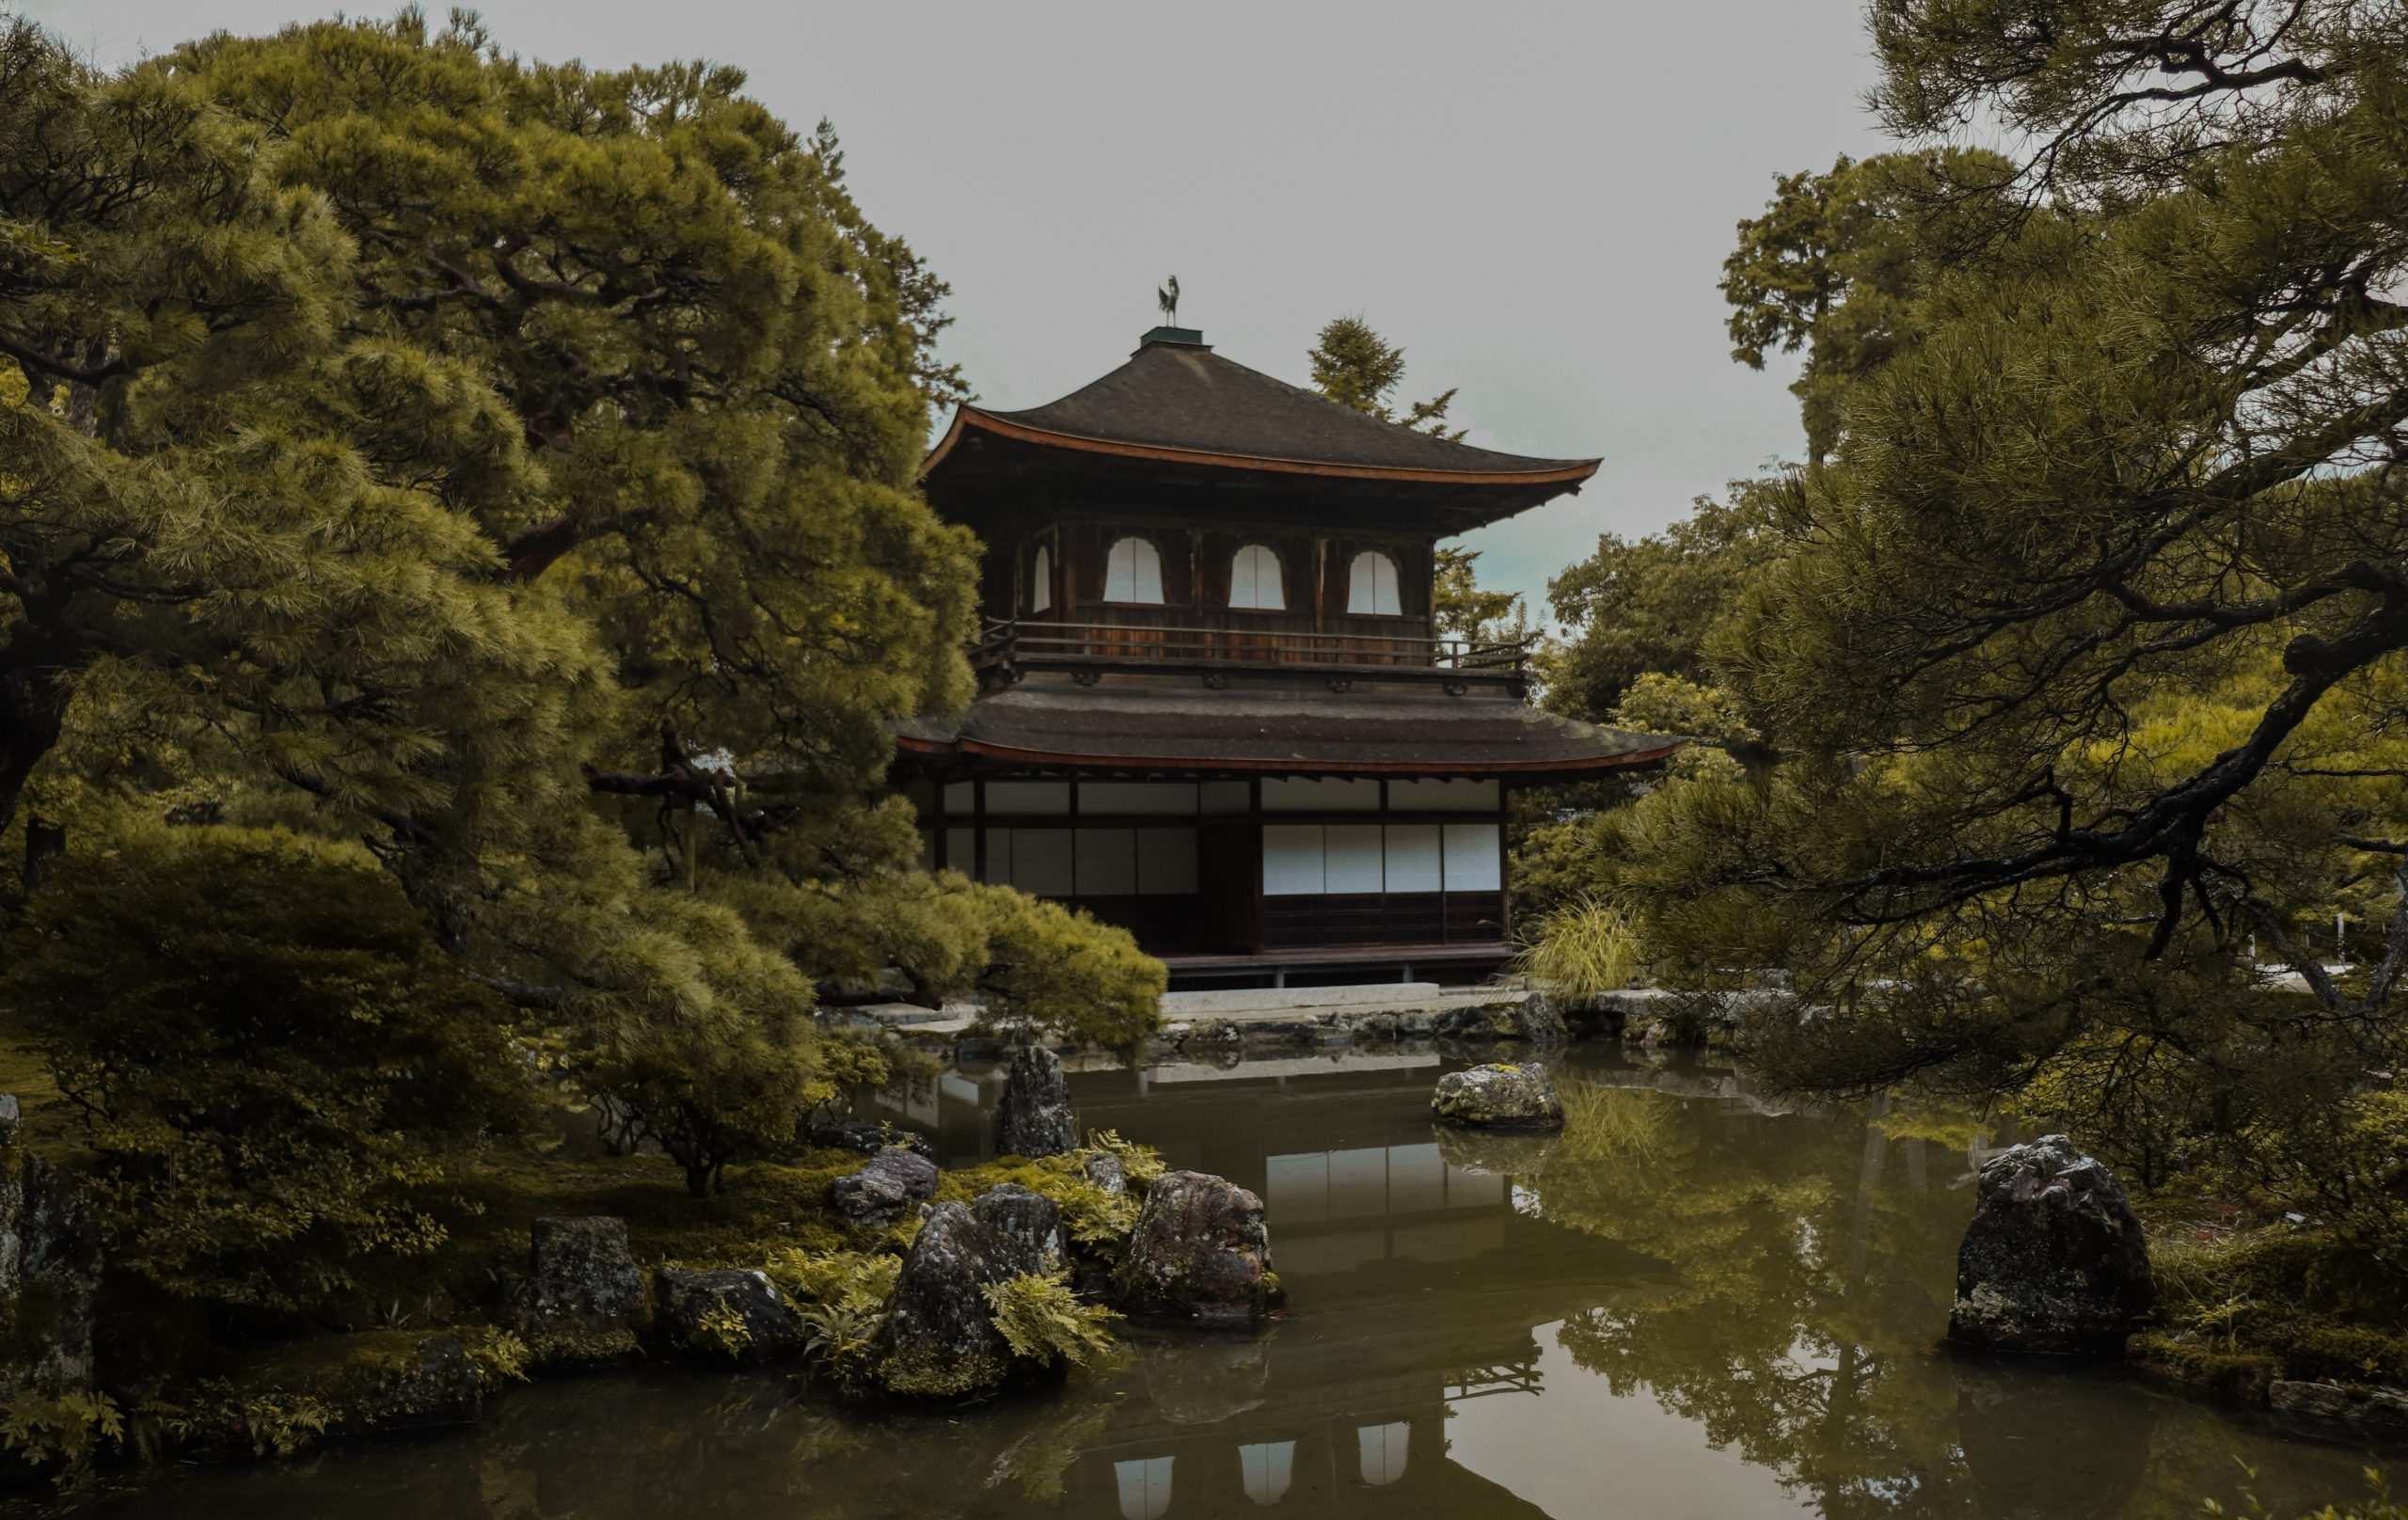 The beautiful Ginkaku-ji temple also known as the silver pavilion